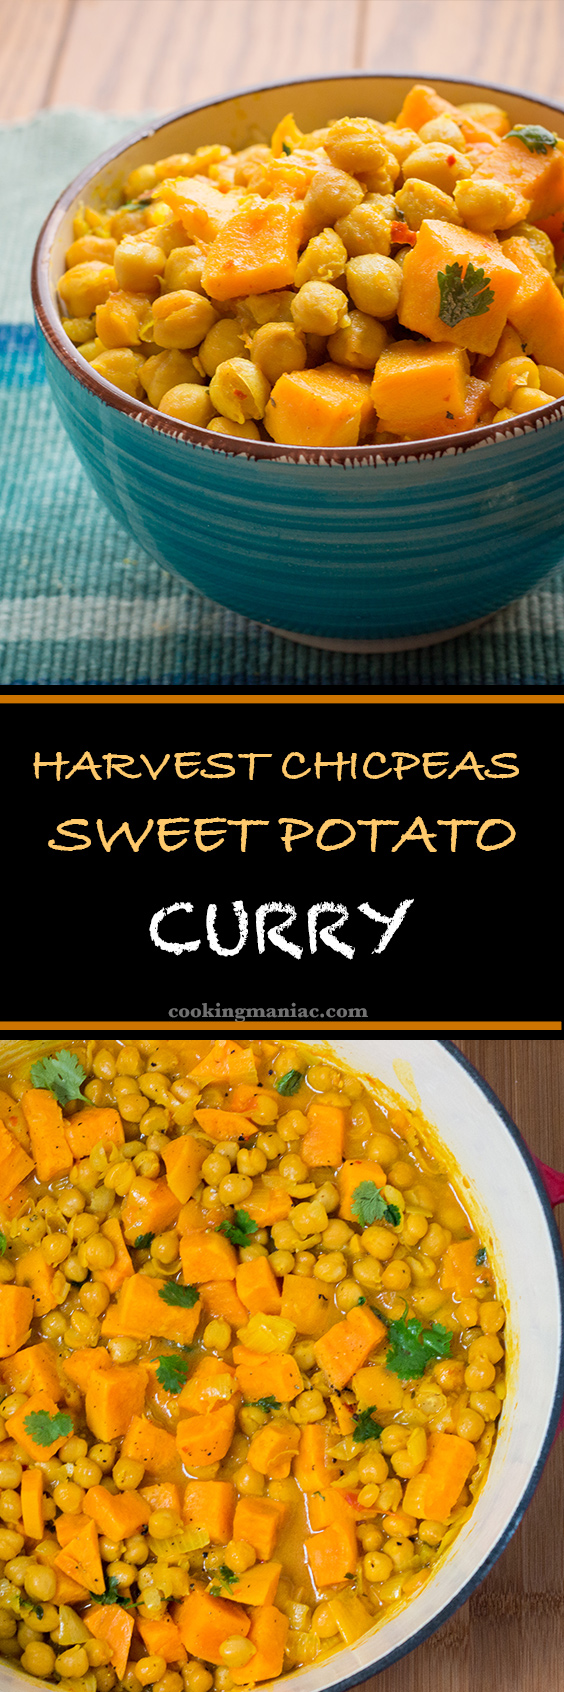 Harvest chickpea and sweet potato Curry is Simple, comforting, warming, and nutritious. Make it today and see why I almost ate the whole pot by myself.